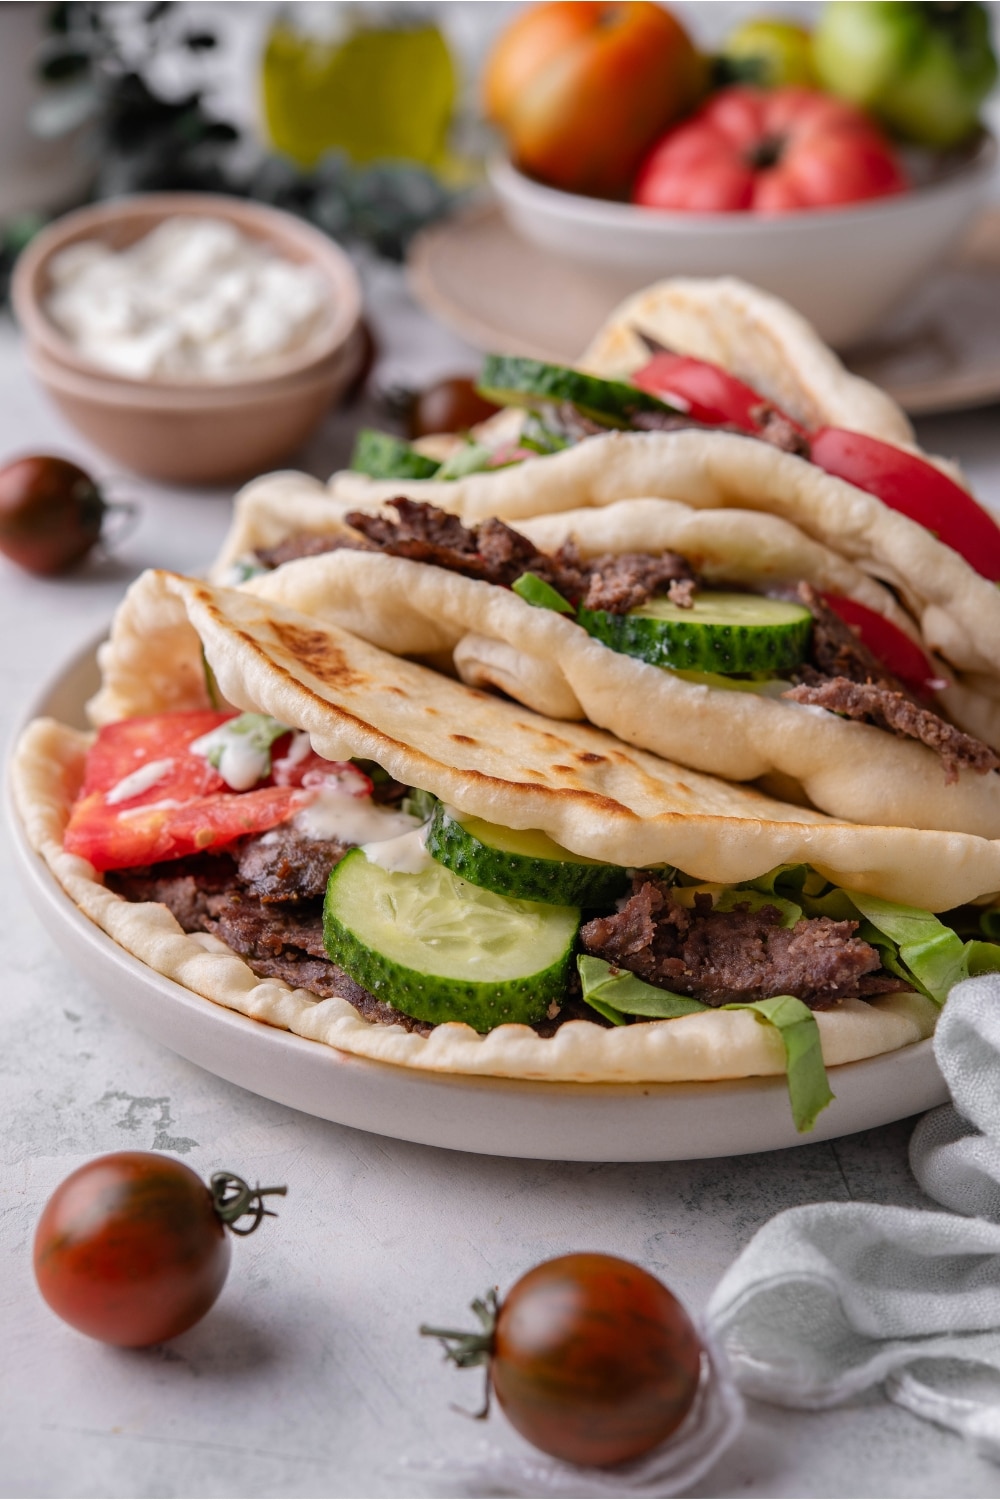 Two gyros on top of each other, each with thinly sliced meat, sliced cucumber, lettuce, tomato and tzatziki sauce.